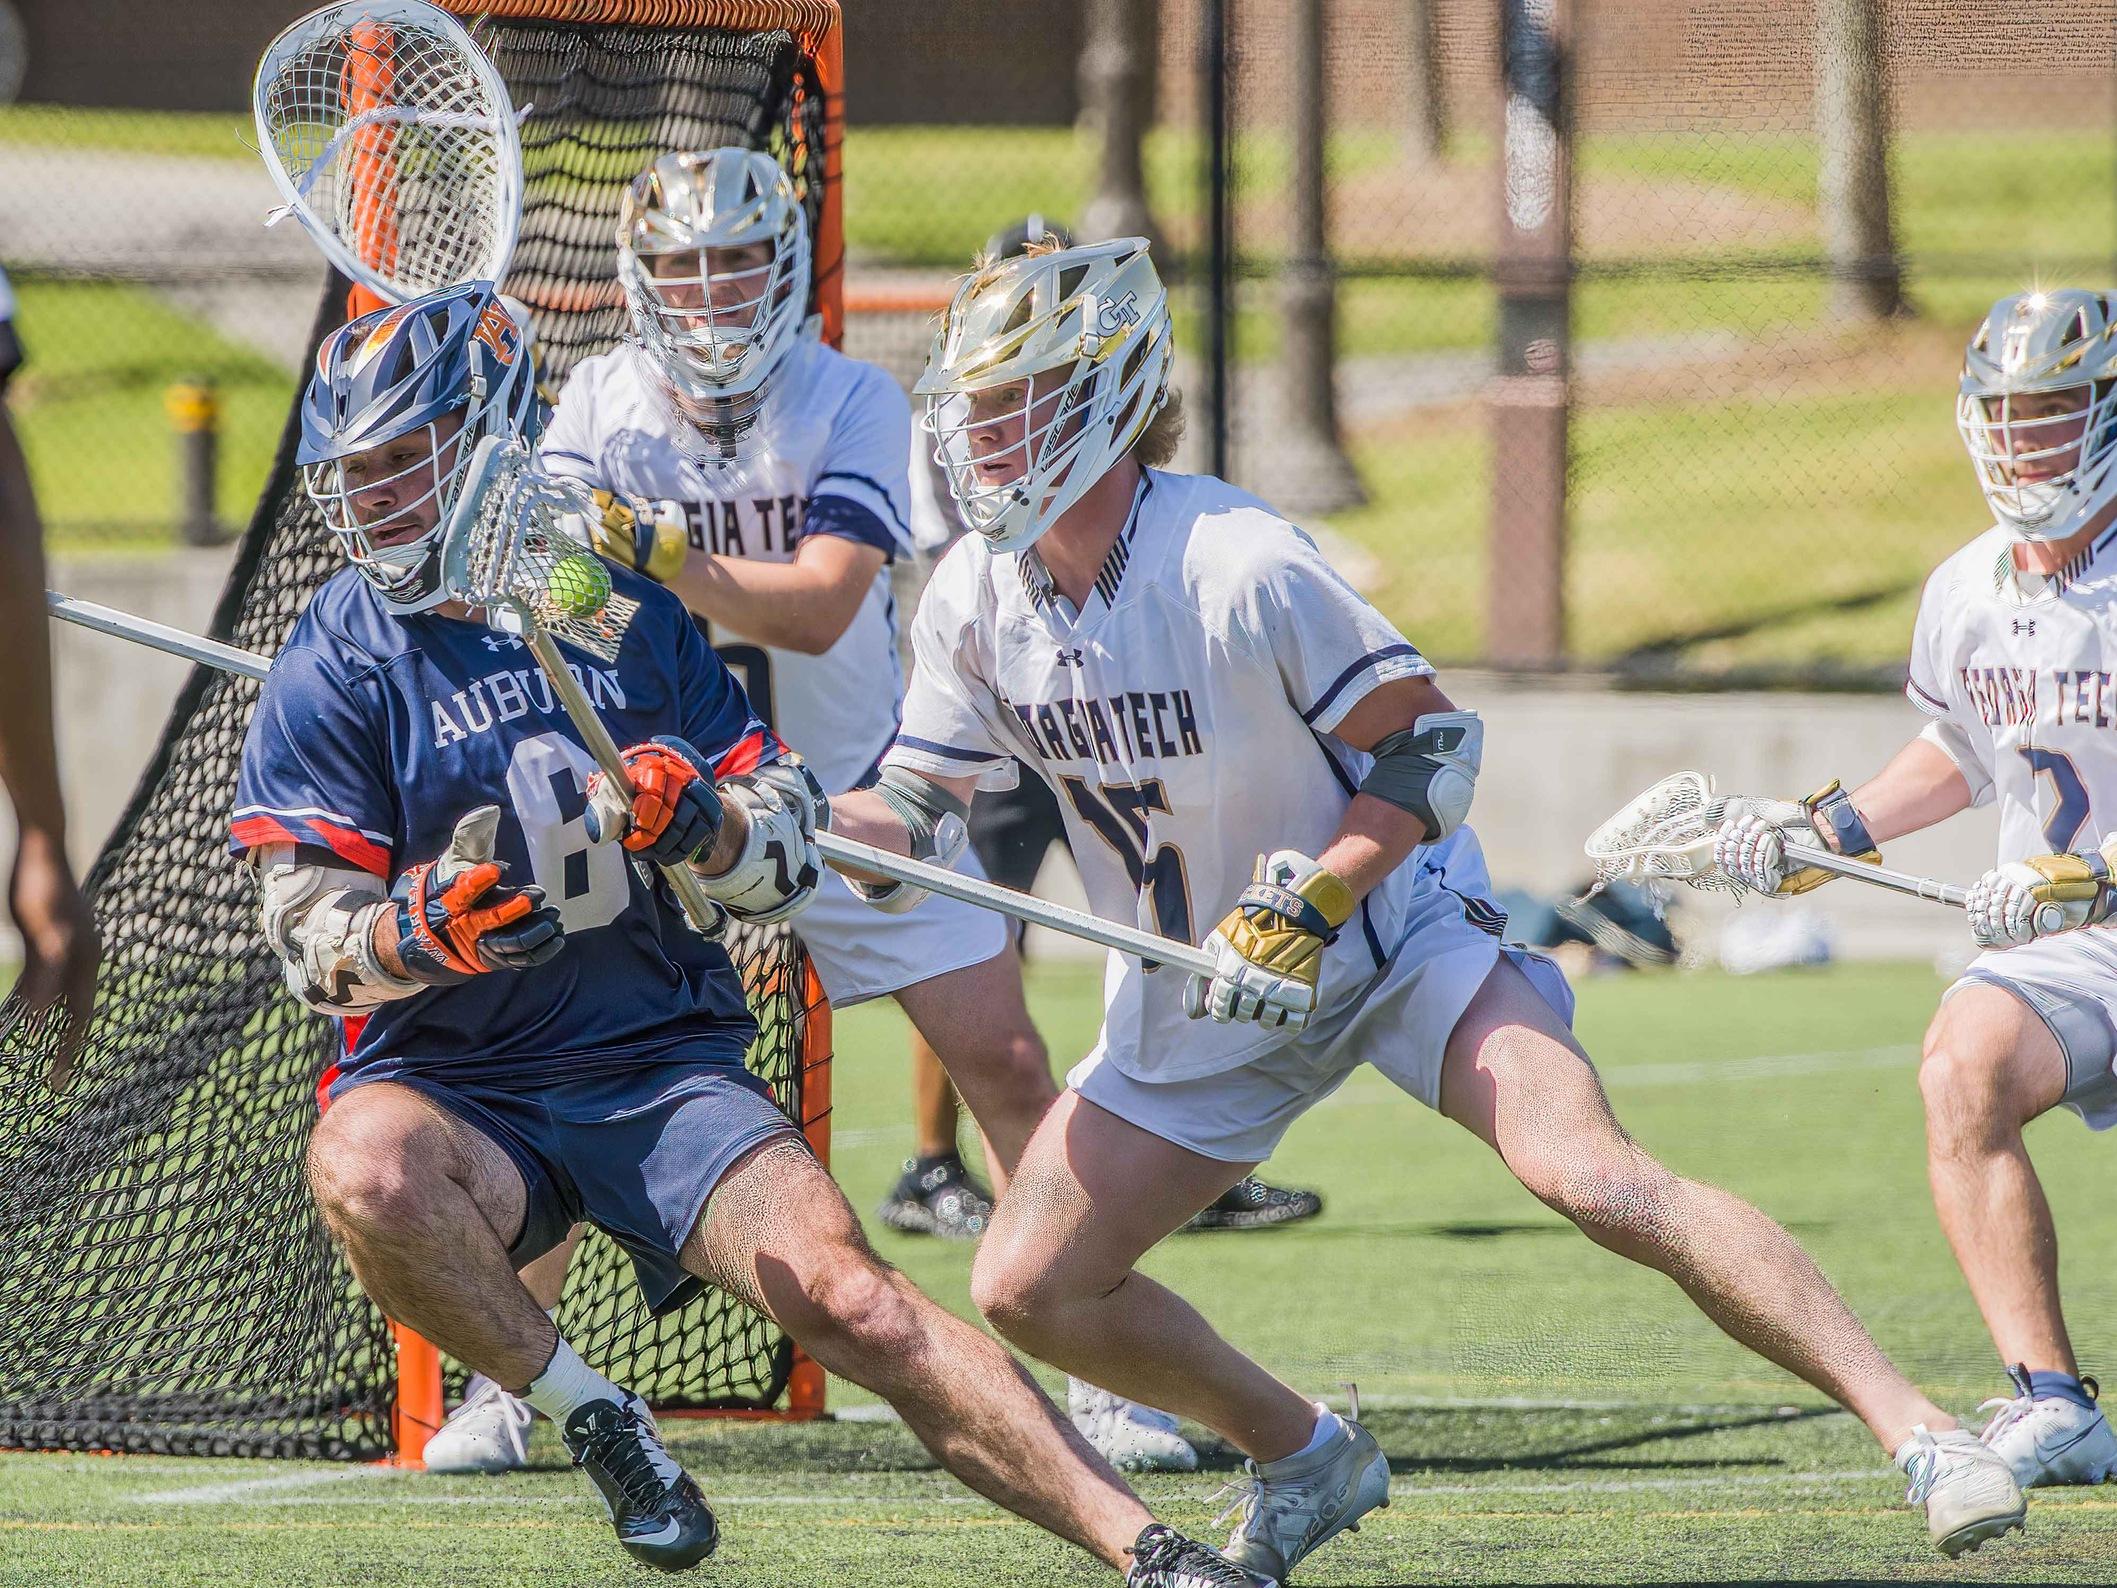 Jackets Trounce Tigers in SELC Quarterfinal